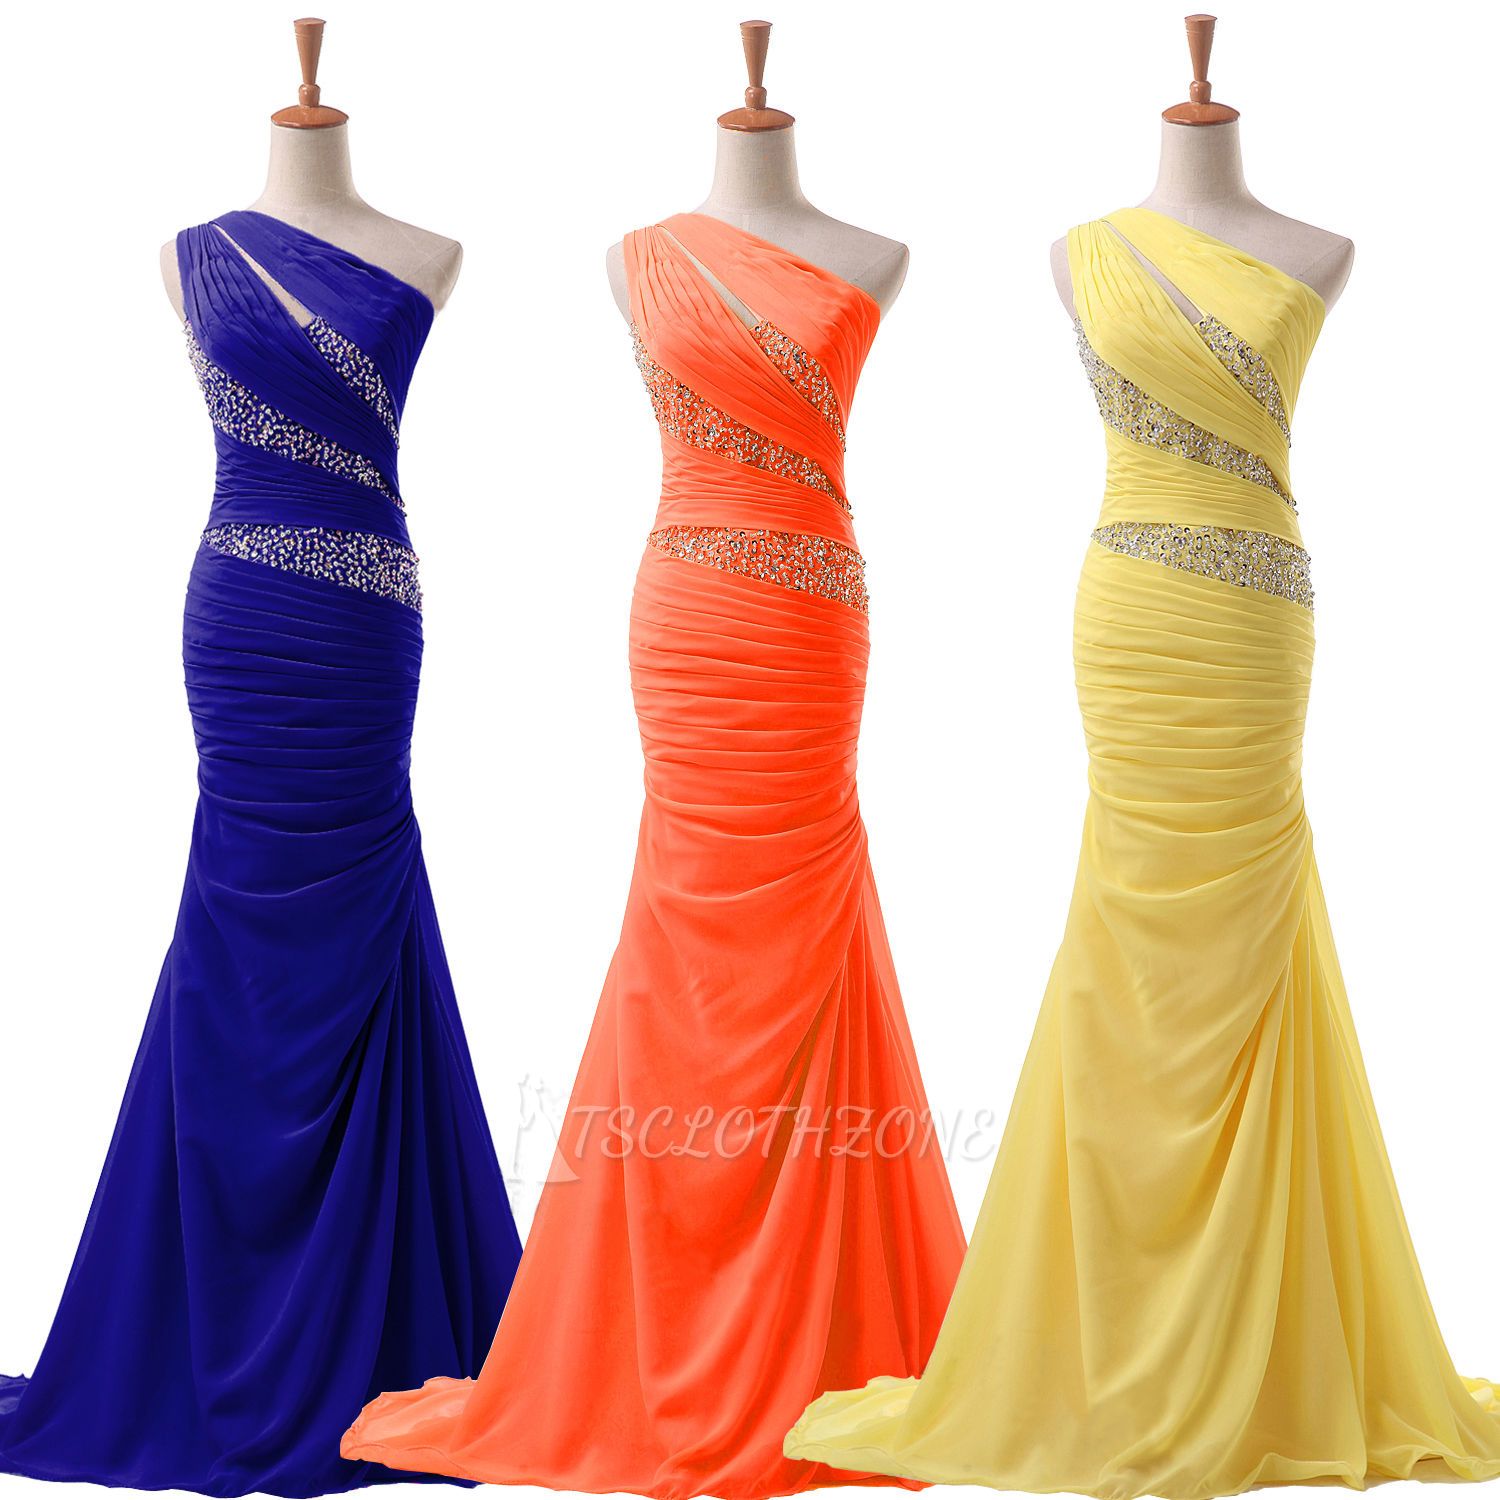 Sexy One Shoulder Mermaid Crystal Evening Dresses with Beadings Latest Ruffles Custom Made Prom Dress for Women